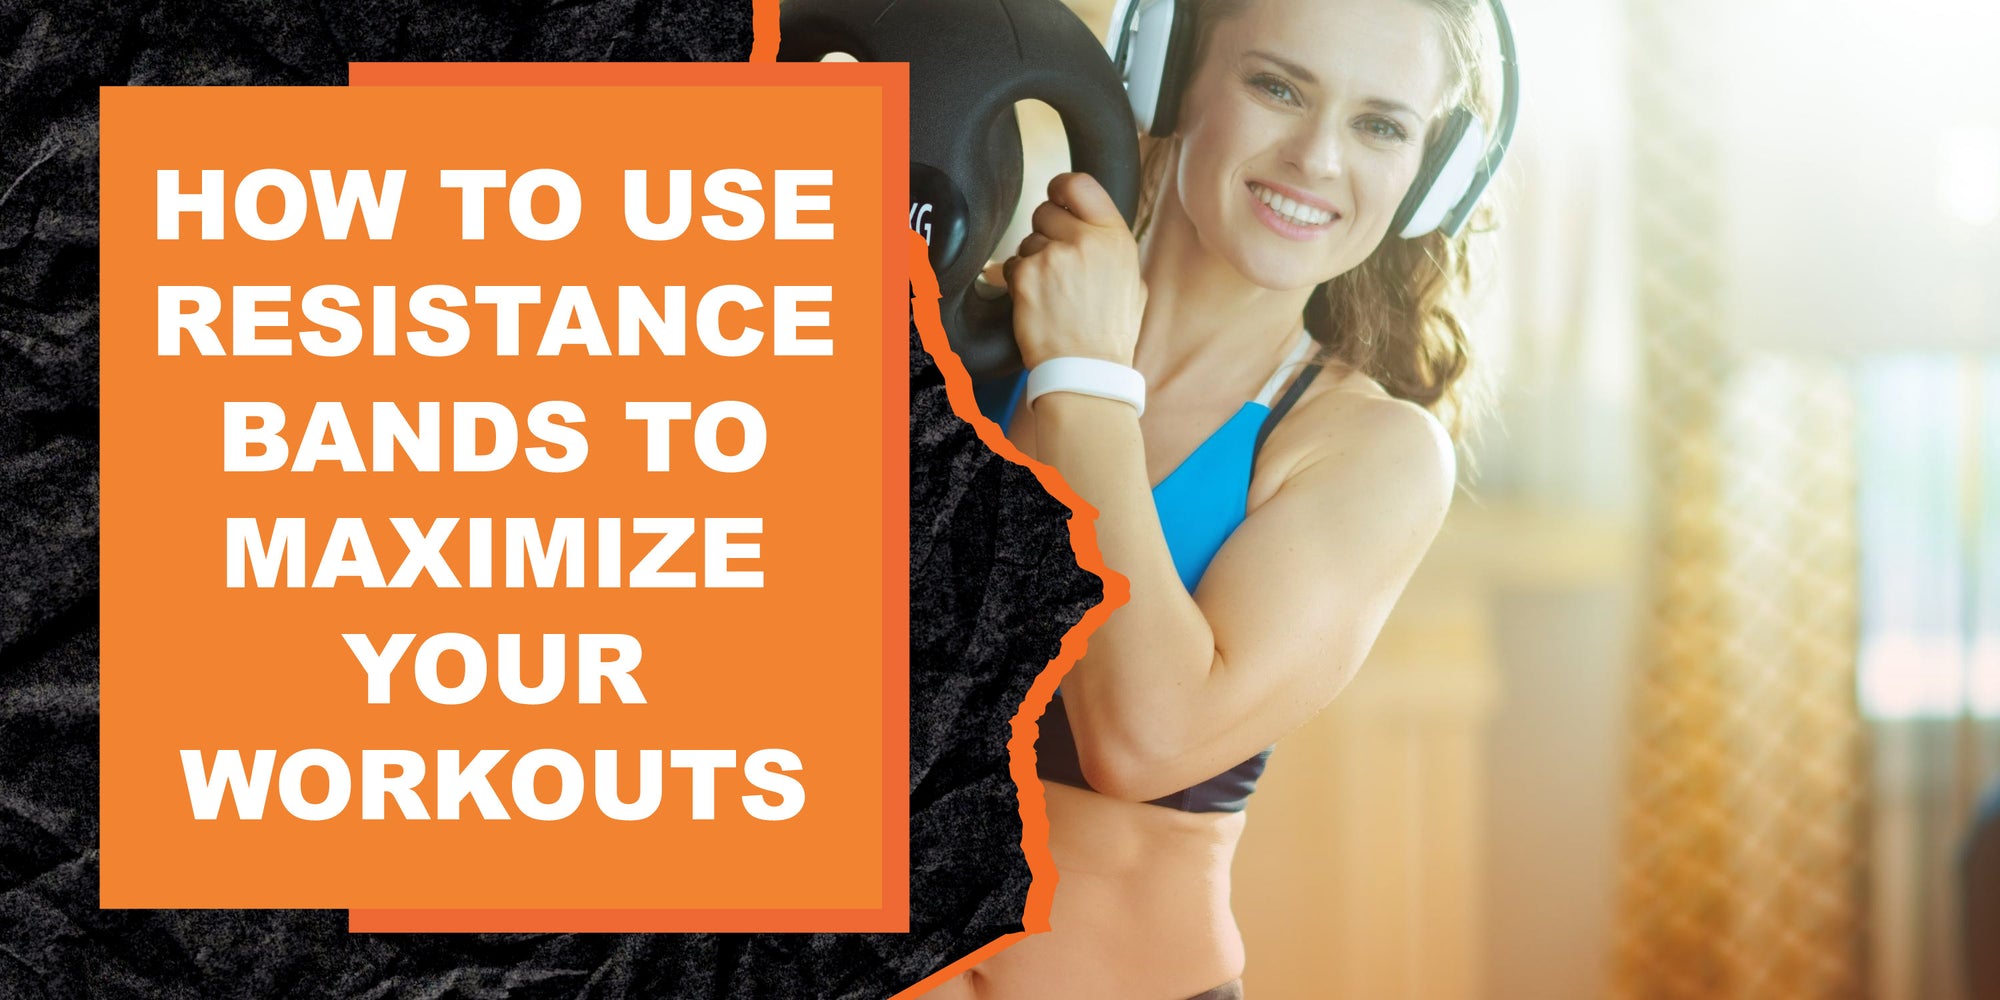 How to Use Resistance Bands to Maximize Your Workouts